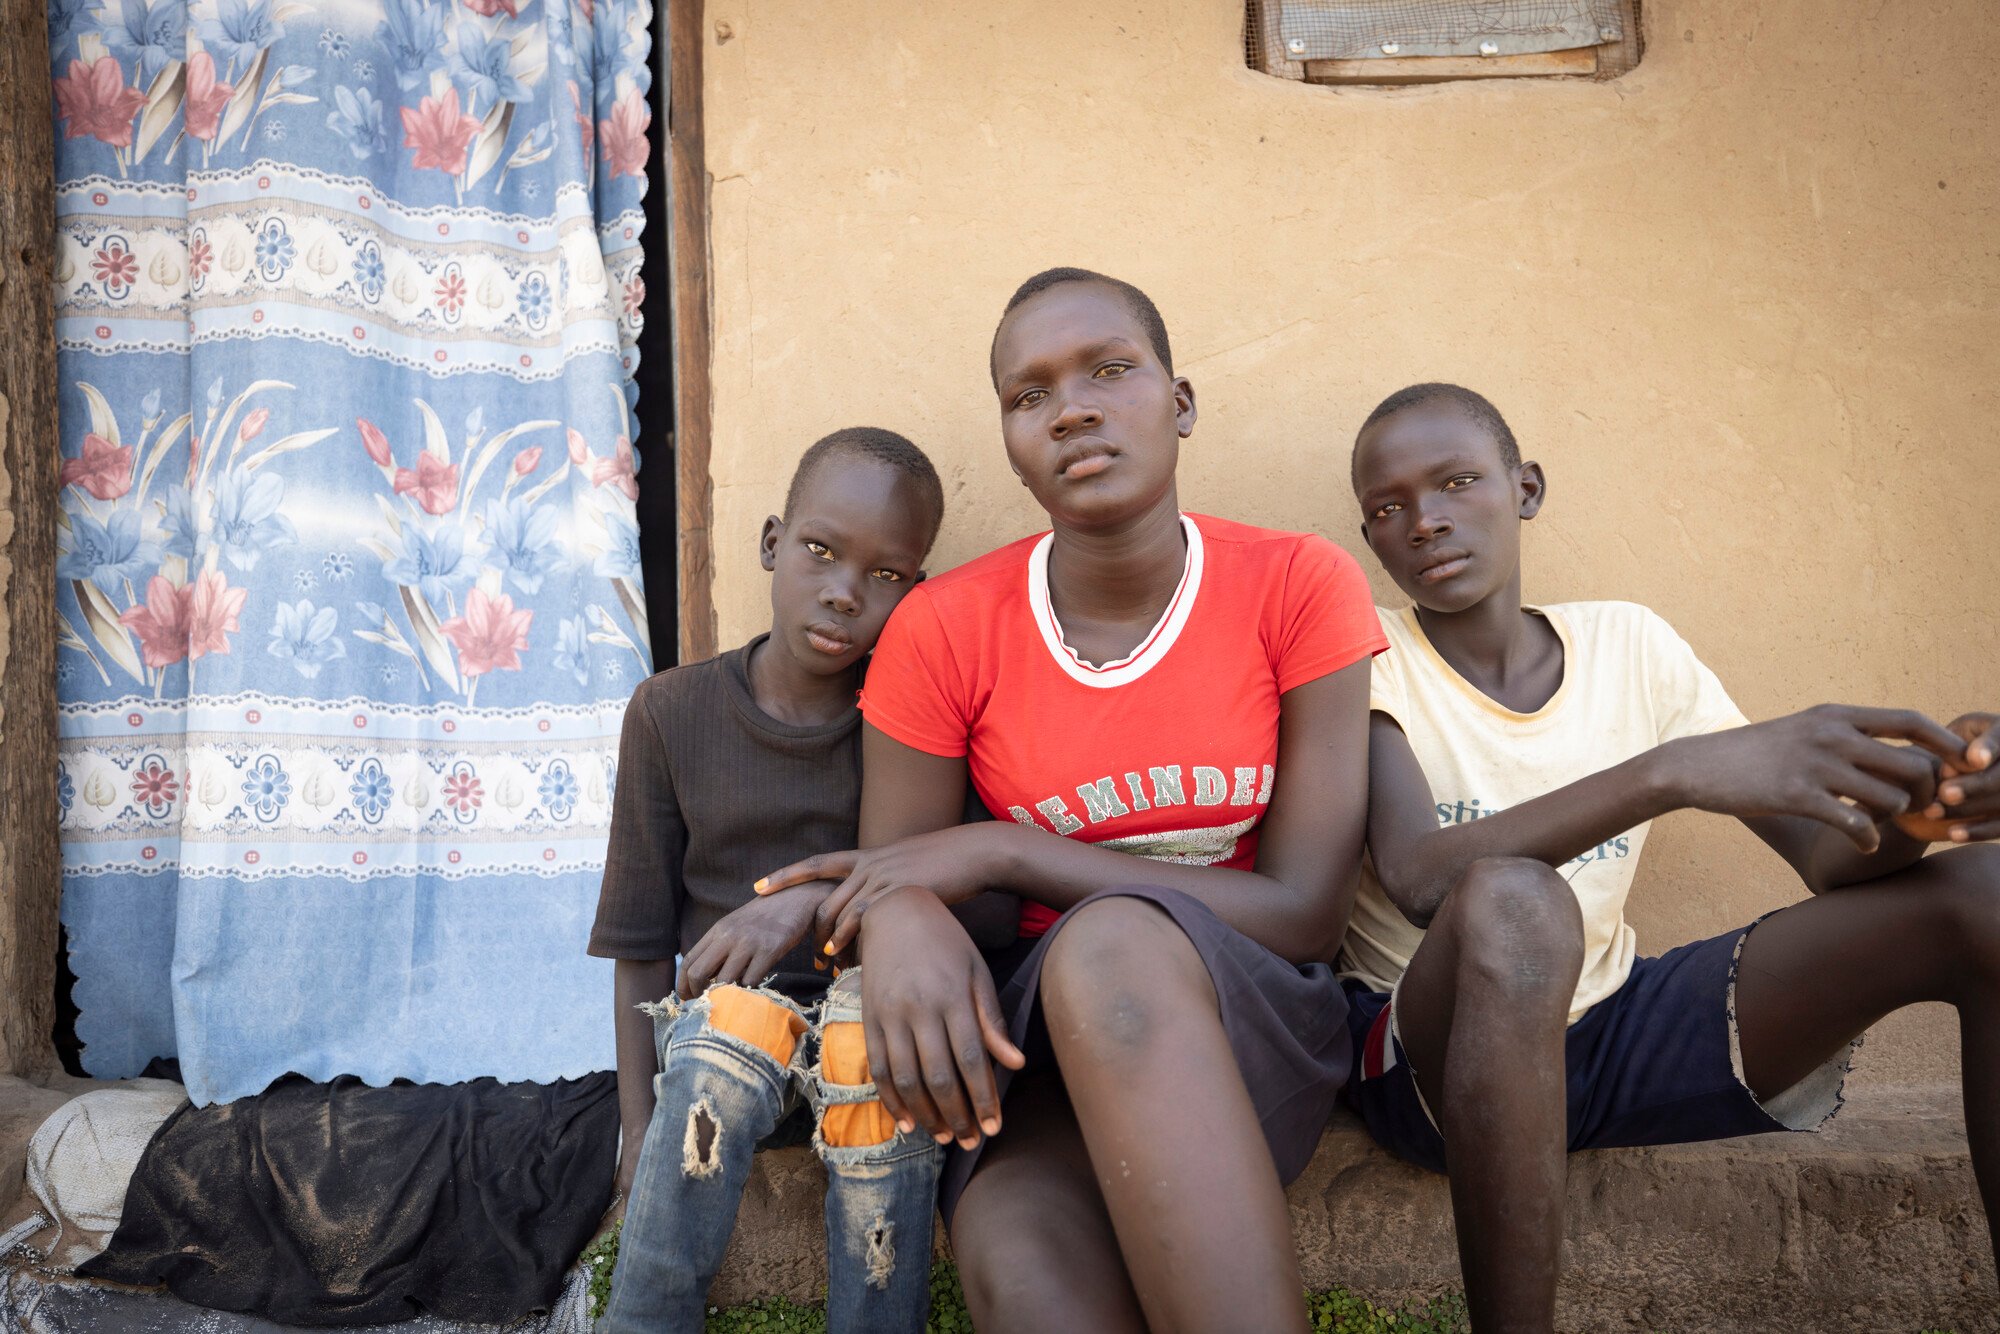 A day in the life of Rose, a child refugee from South Sudan